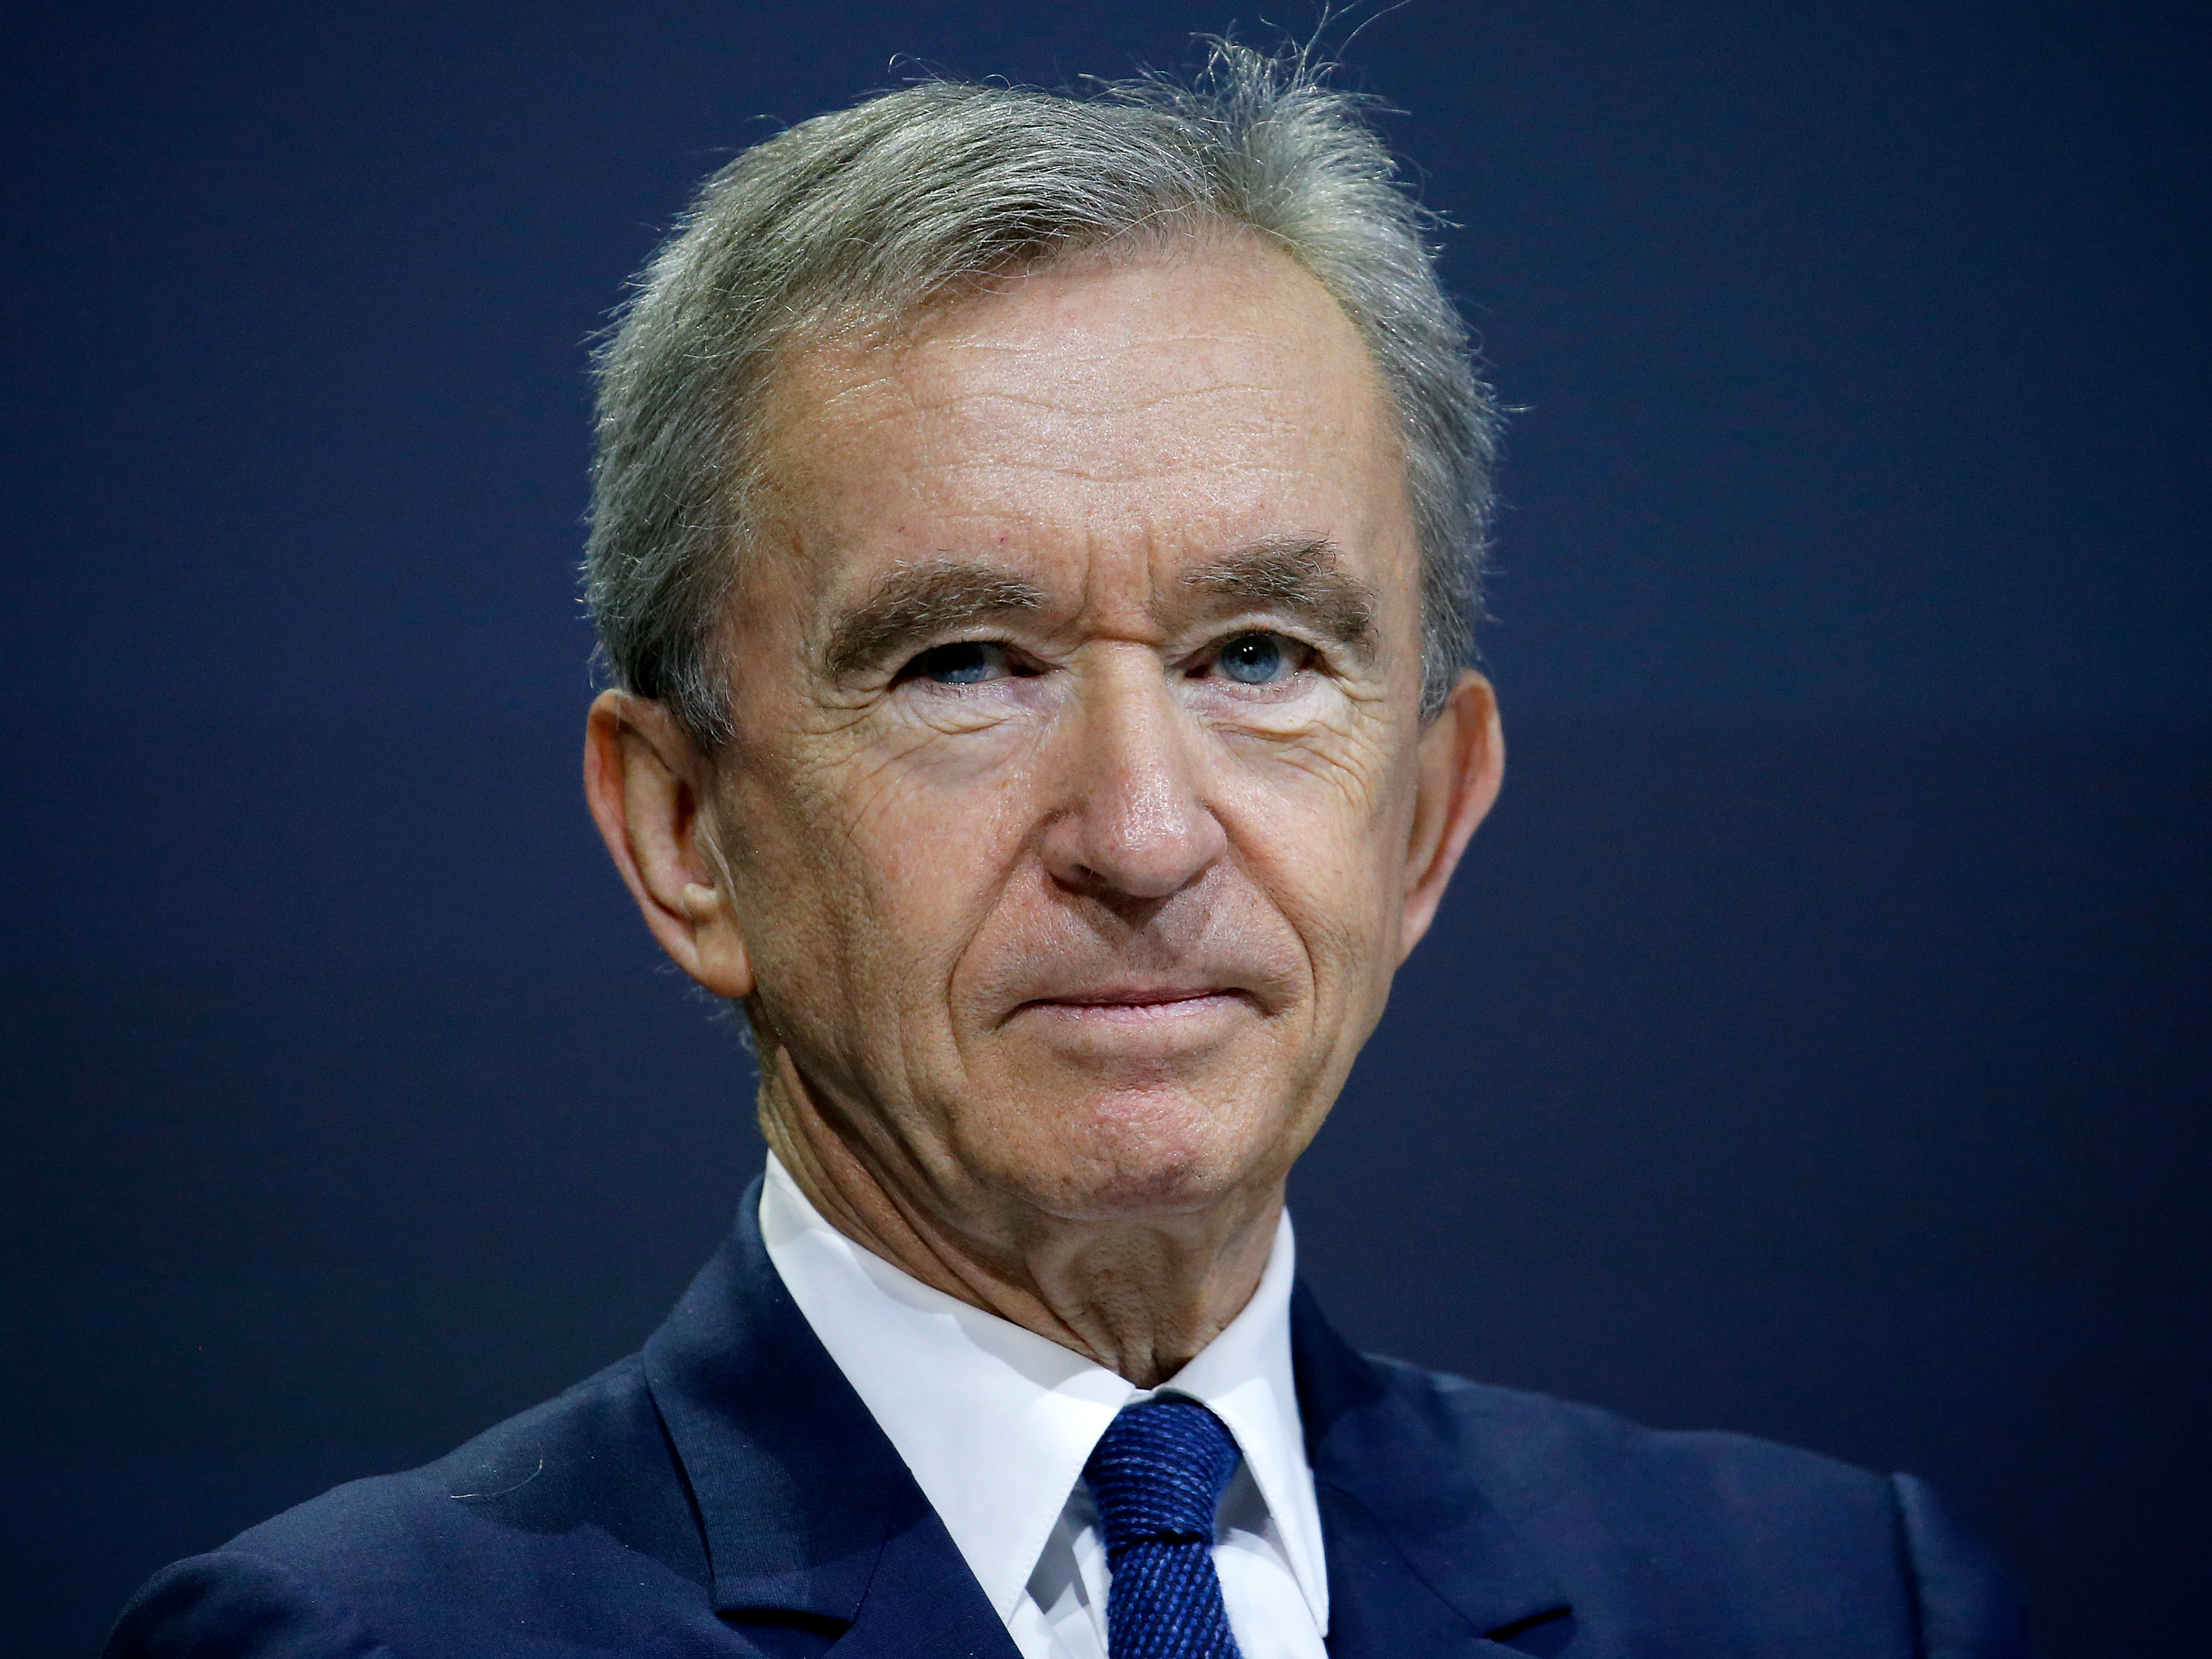 Bernard Arnault has lost more money due to the coronavirus than any other  billionaire. Meet the CEO of luxury goods giant LVMH, who was once the  world's 2nd-richest person.